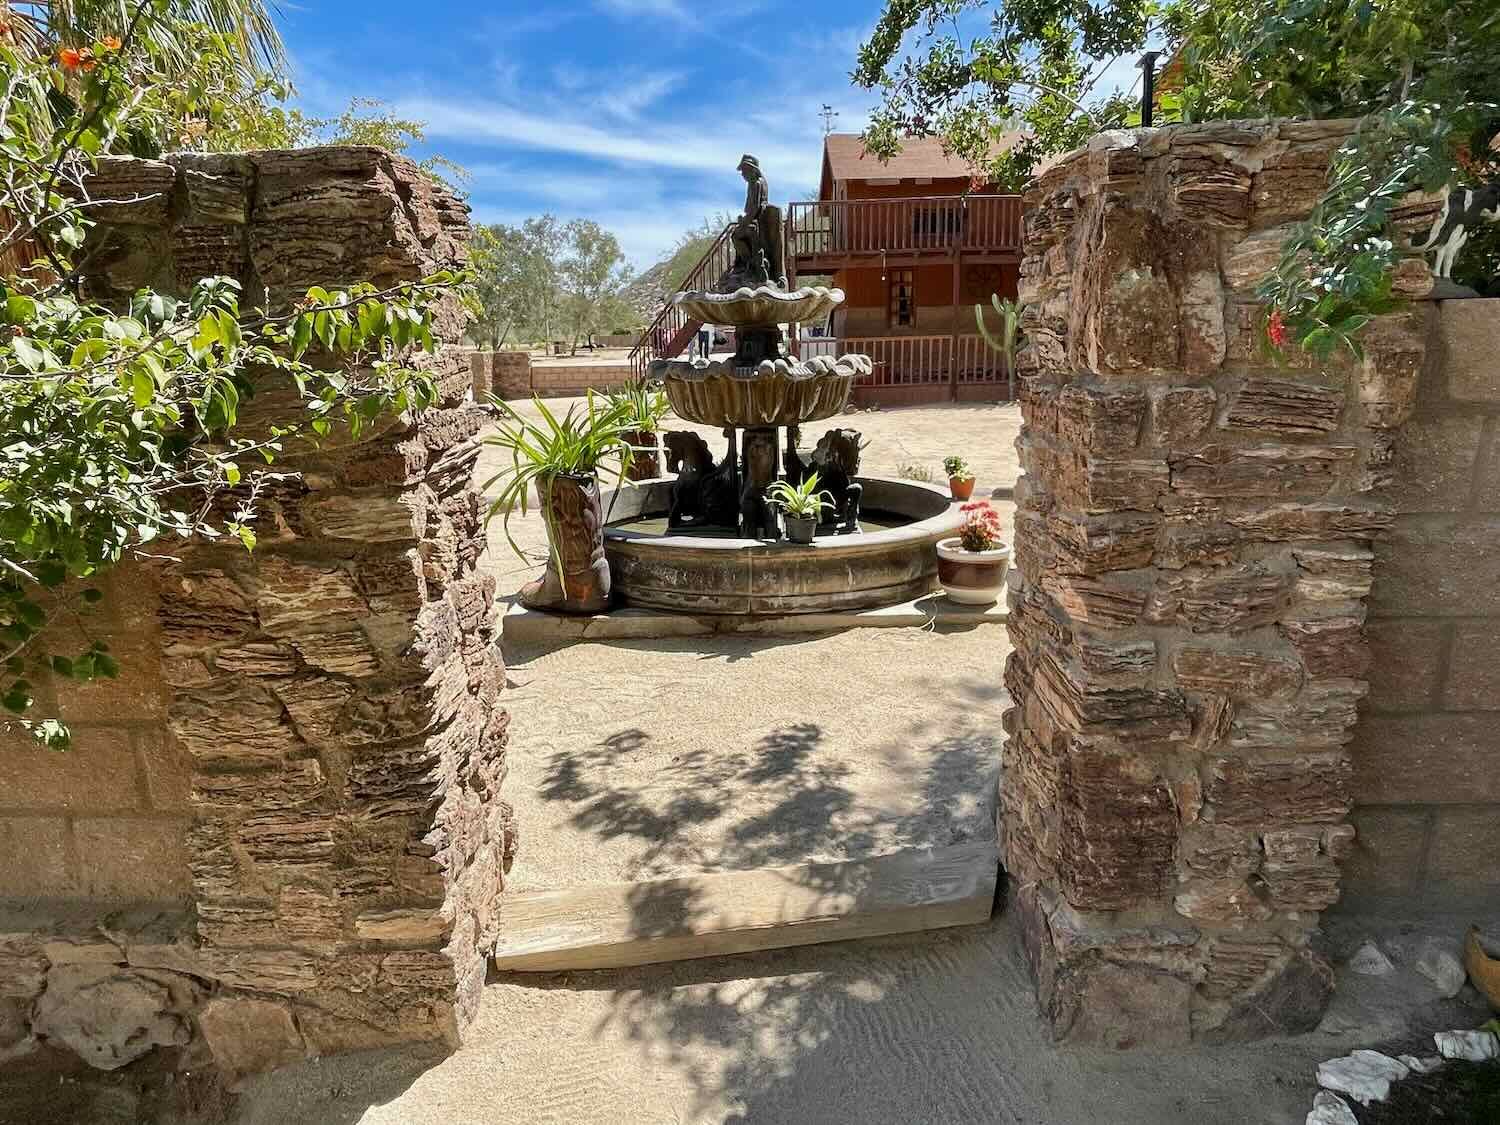 A tranquil retreat in the desert